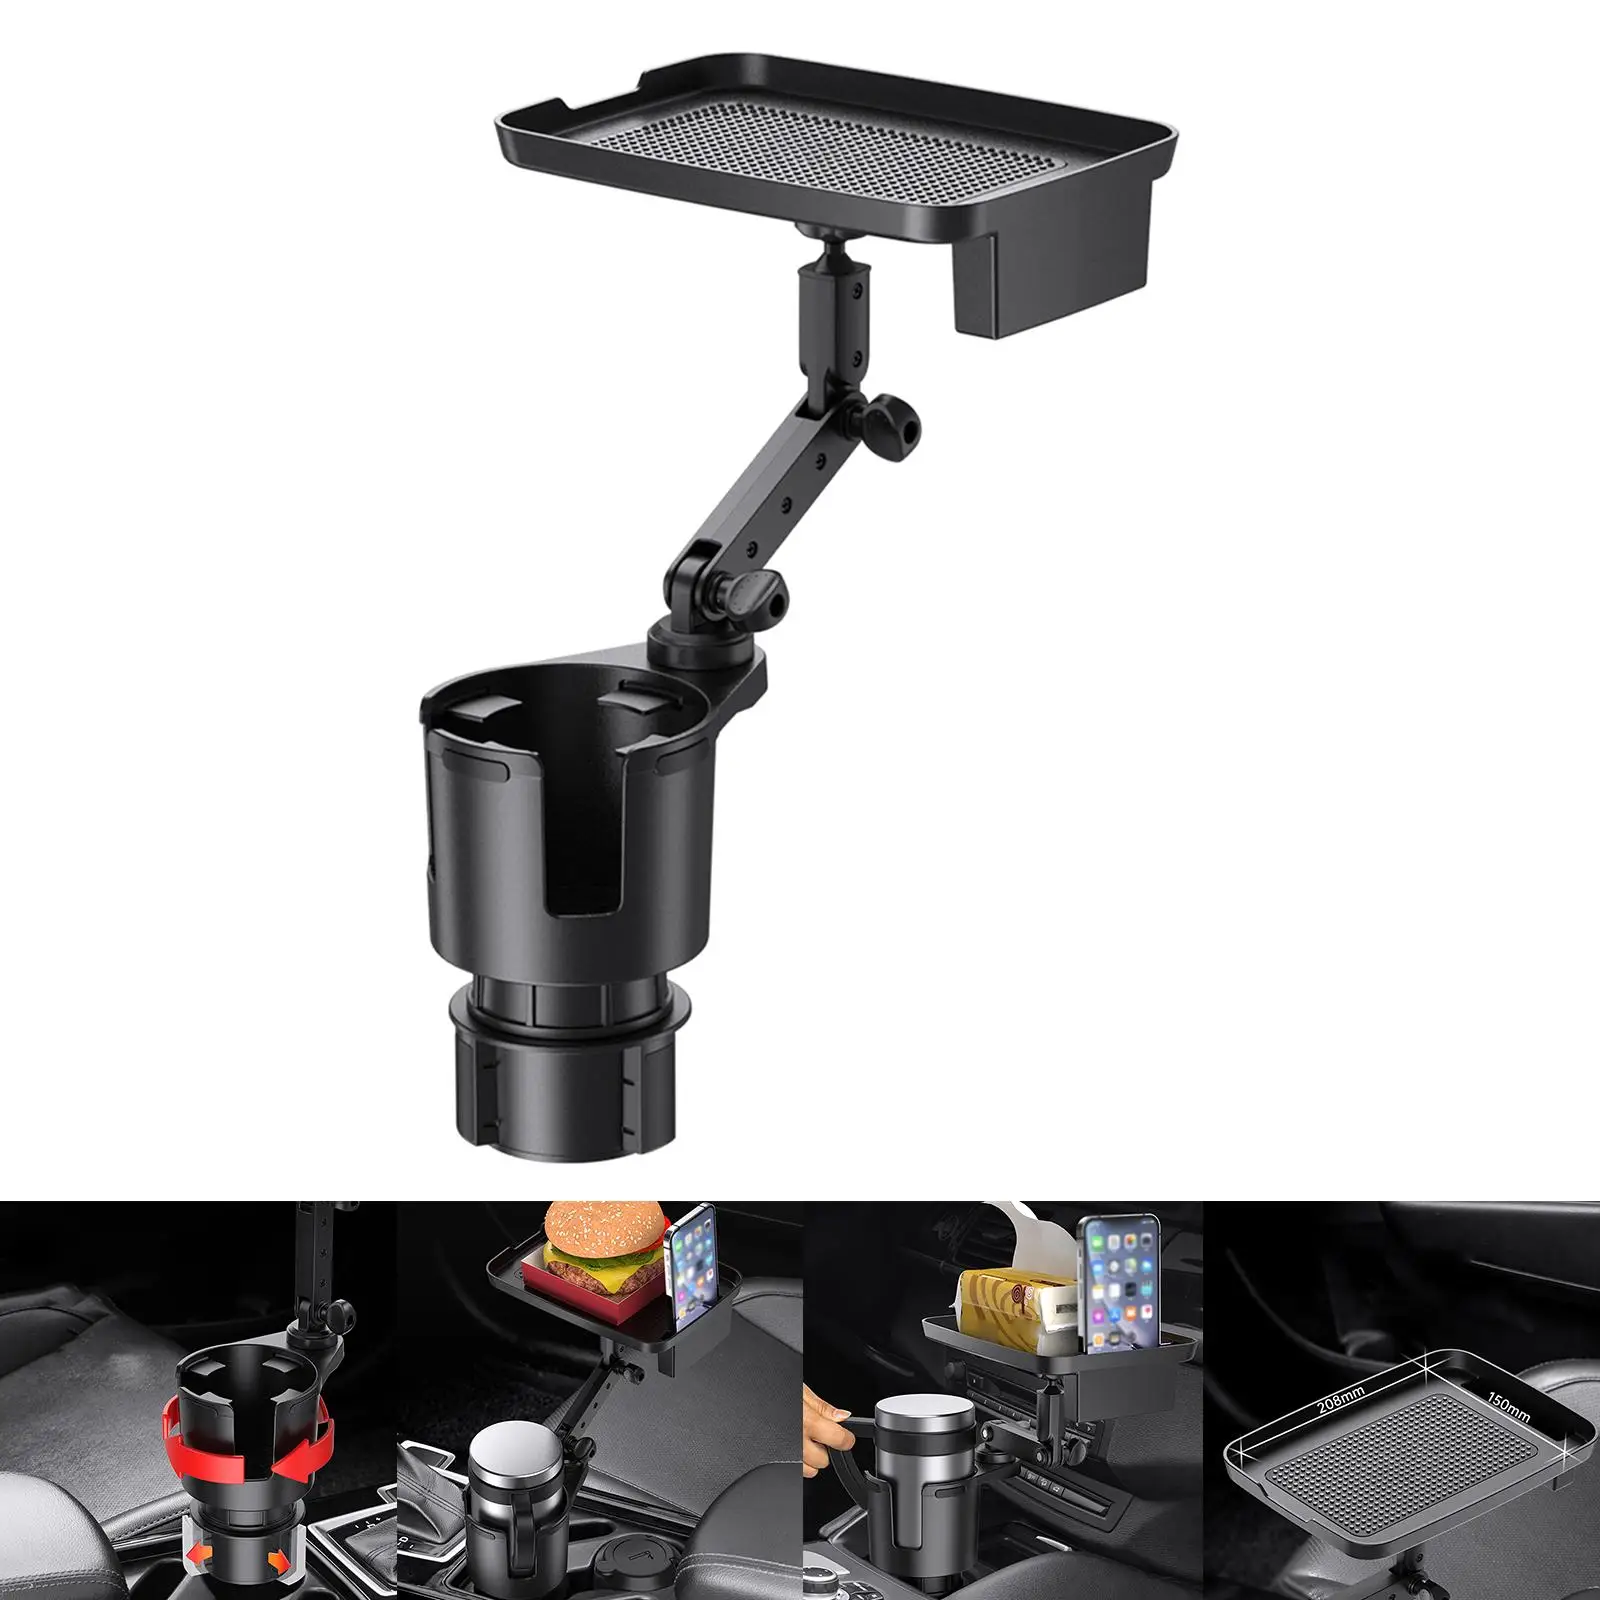 Car Cup Holder Storage Tray Adjustable Base Stable for Beverage Cups